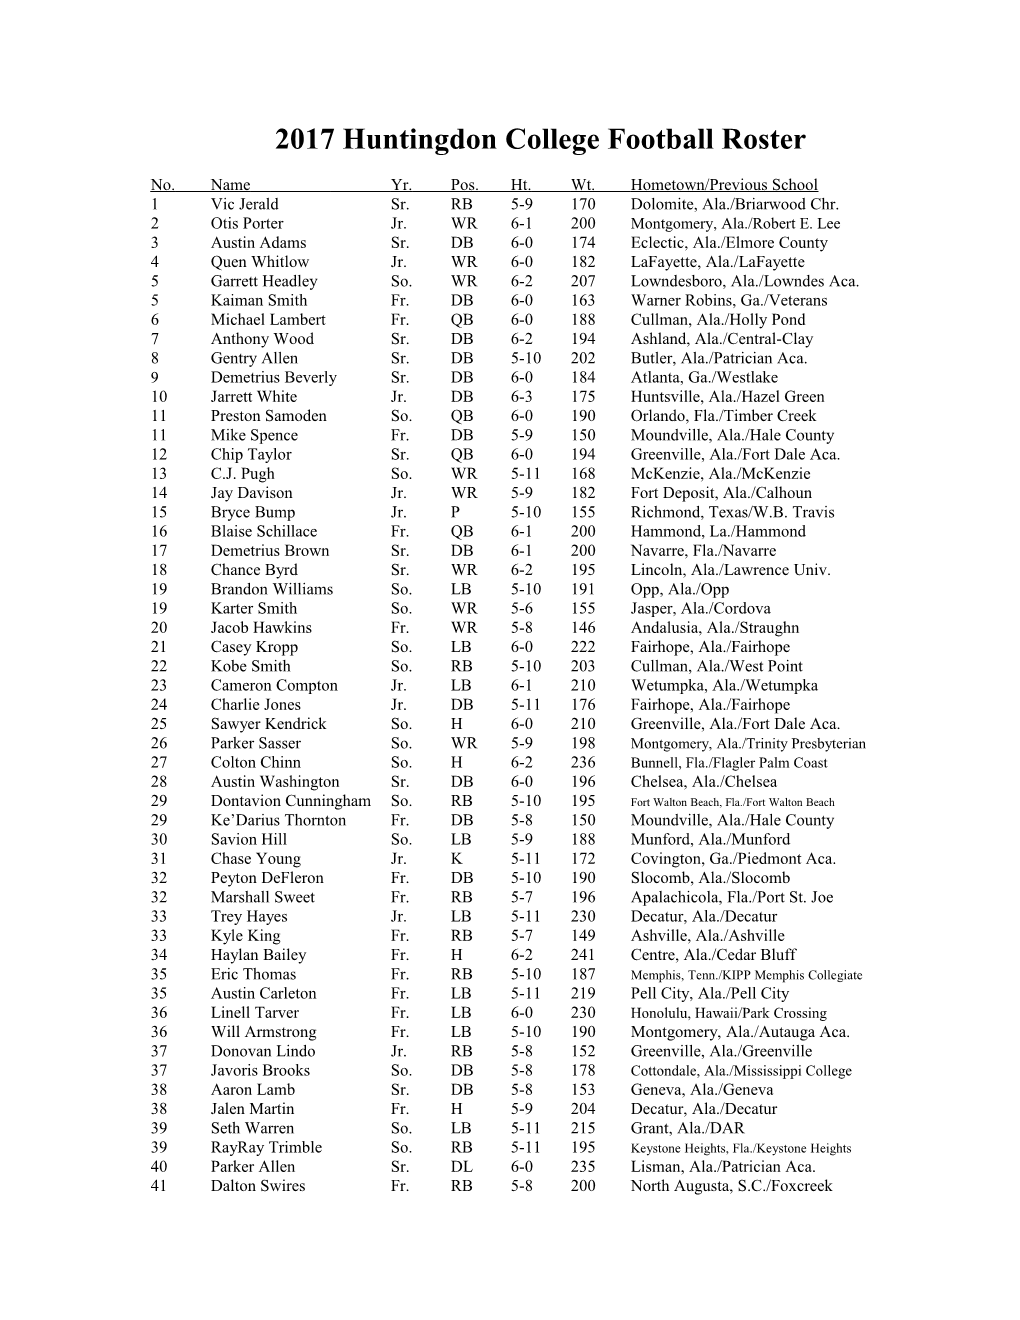 2014 Huntingdon College Football Roster